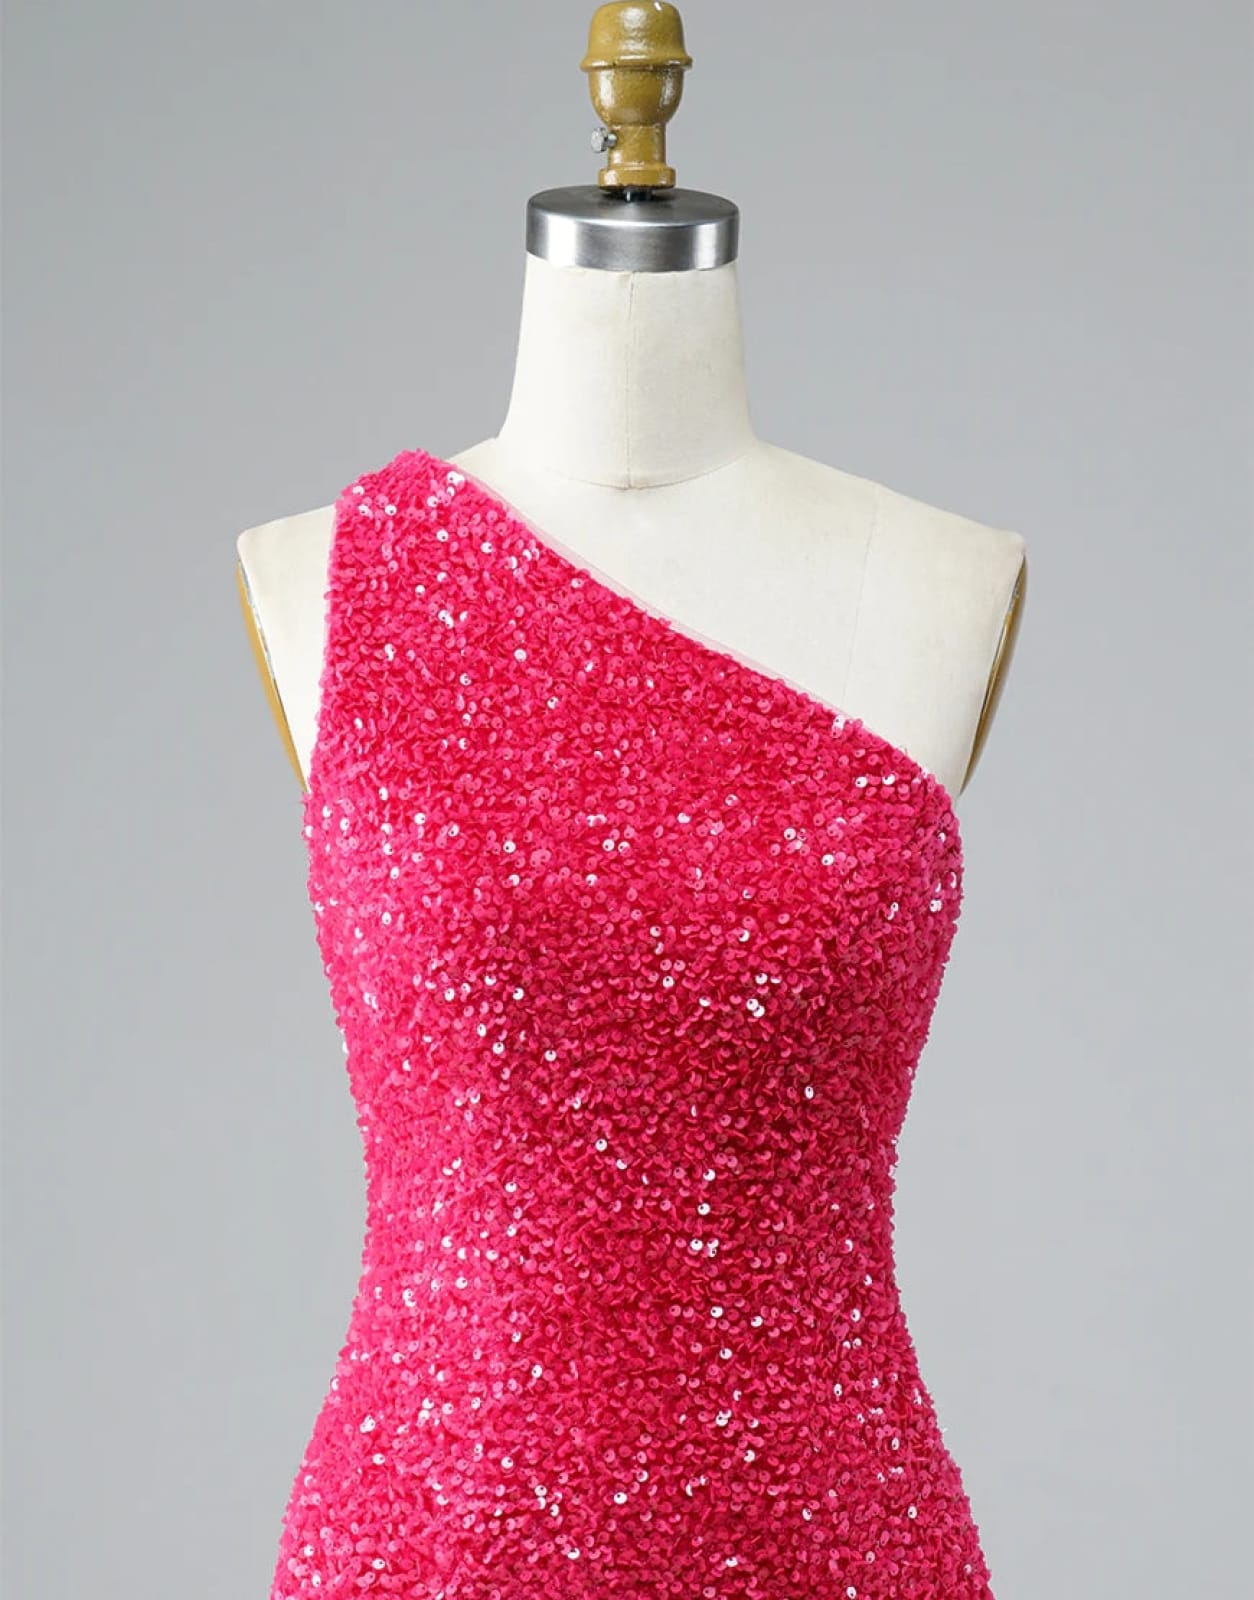 Glitter Hot Pink Sequin One Shoulder Homecoming Wedding Party Dress